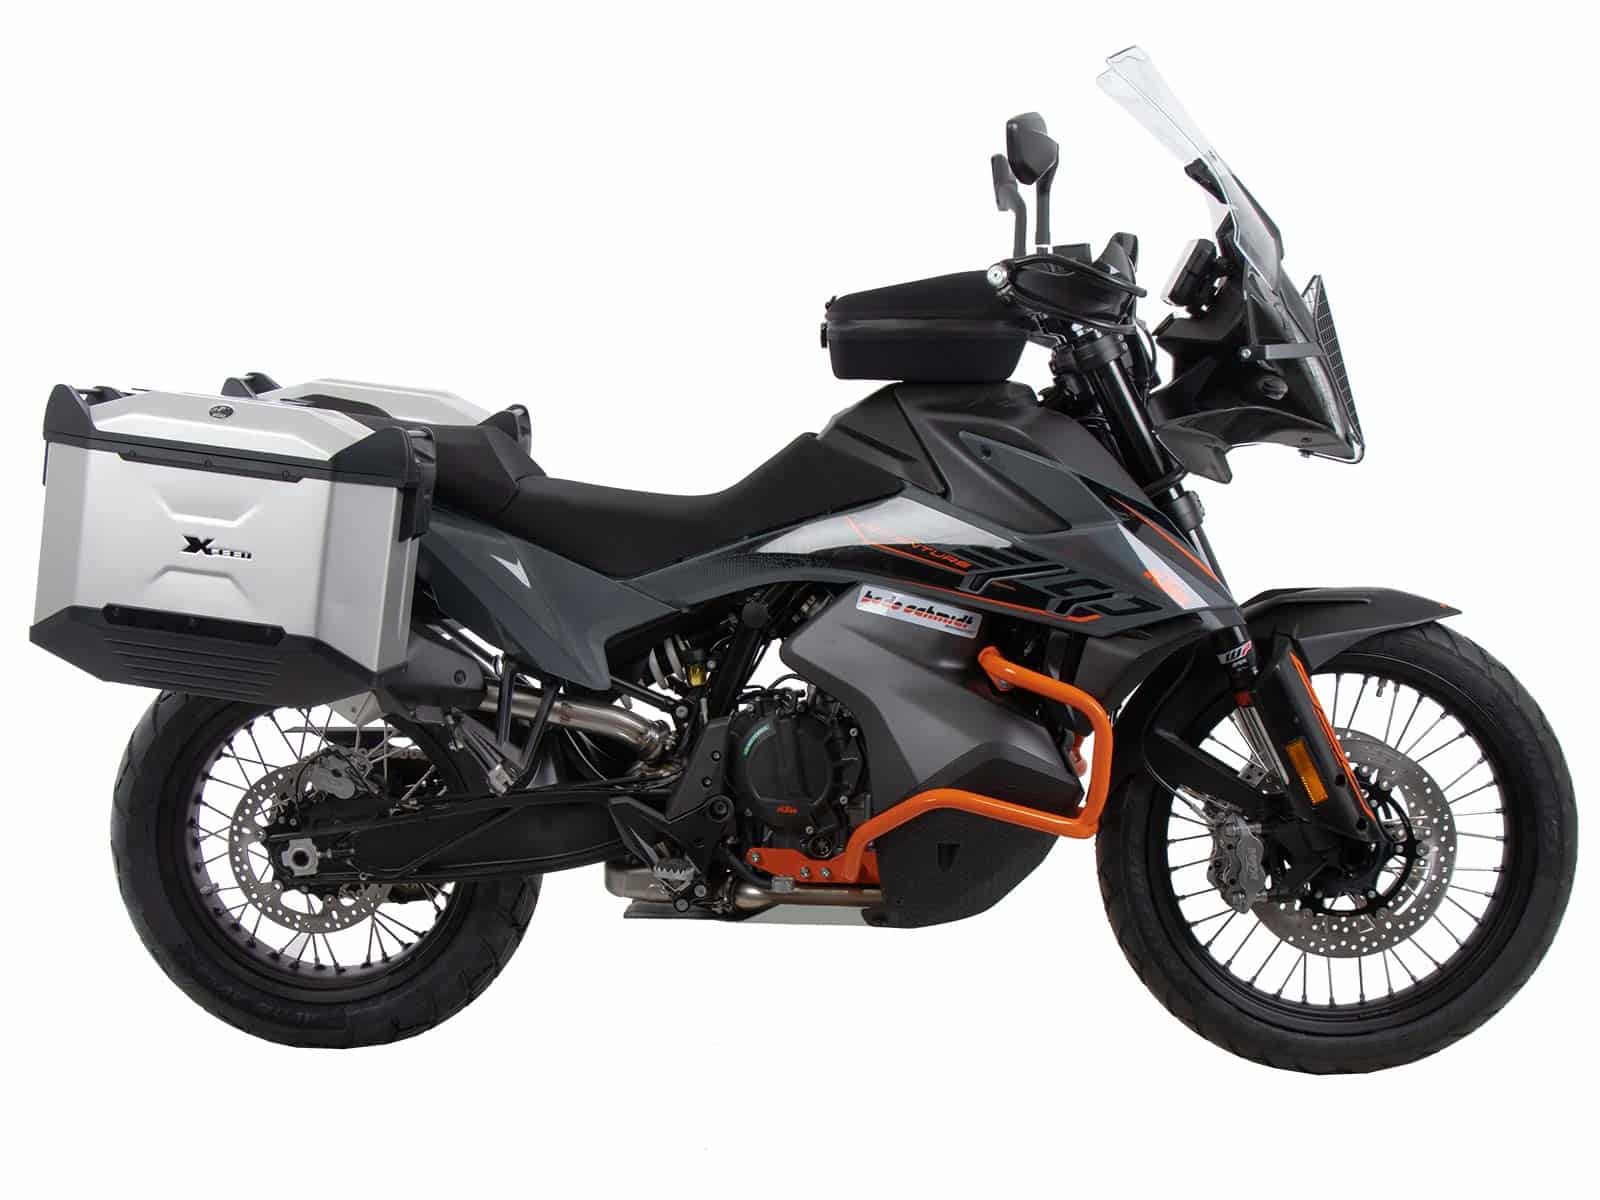 Side carrier permanent mounted black for KTM 890 Adventure / R / Rally (2021-2022)